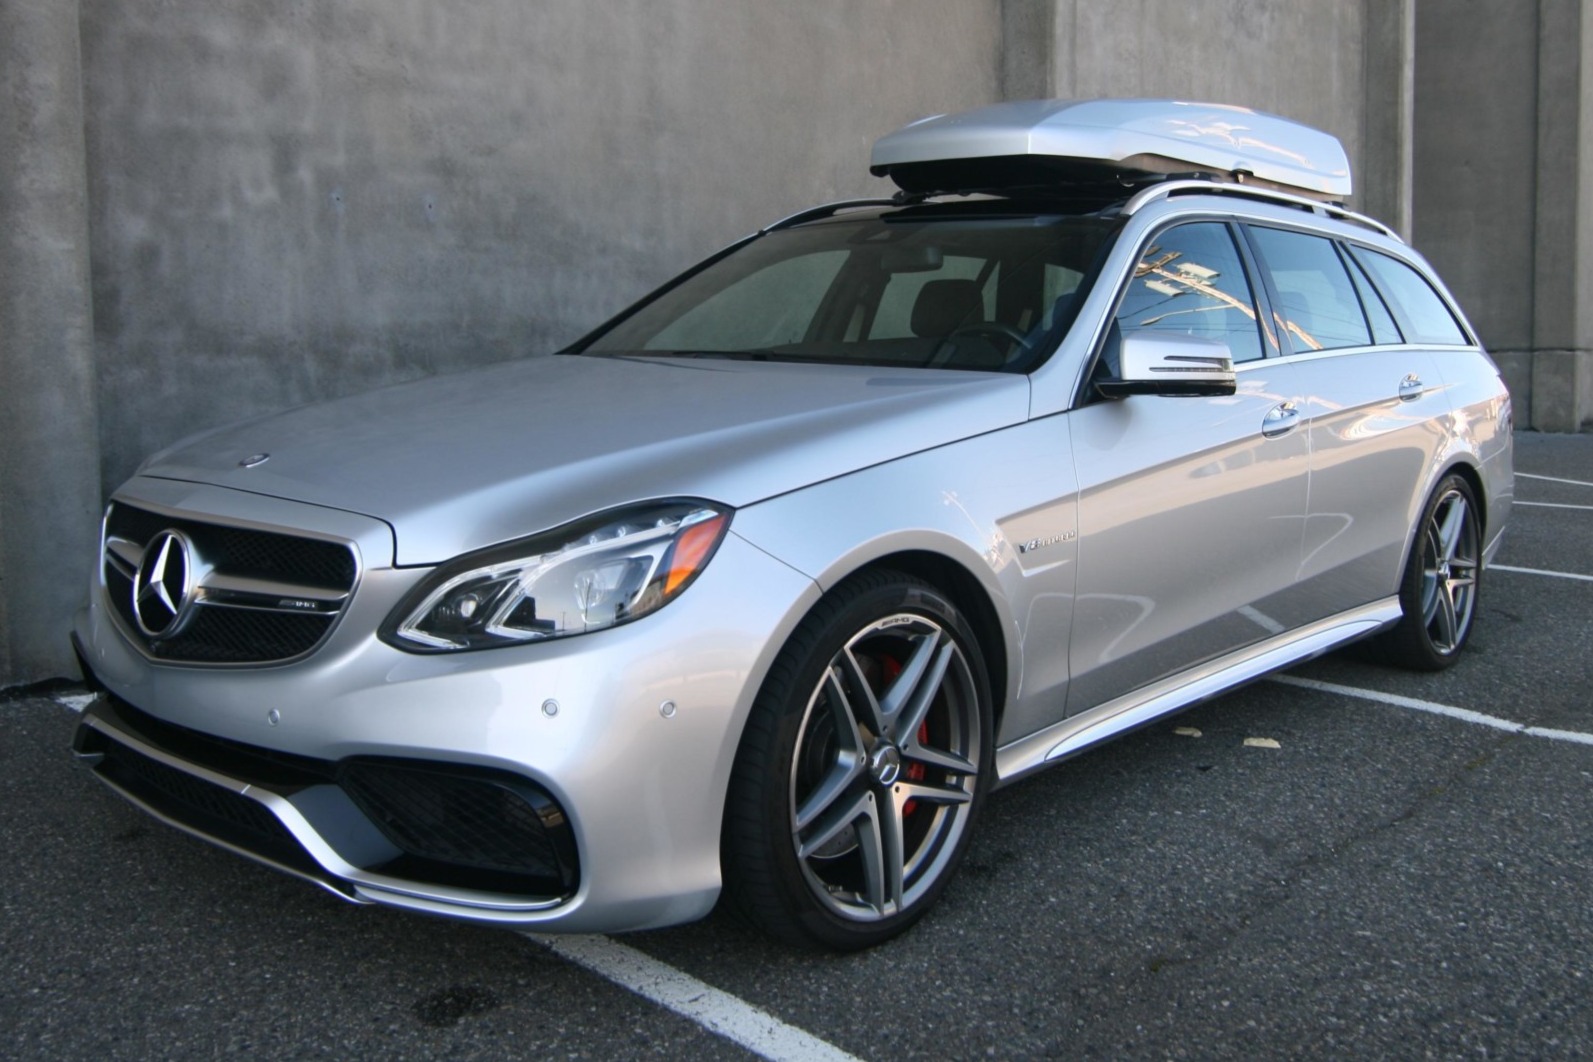 Mercedes Benz E63 S Amg 4matic Wagon The Big Picture